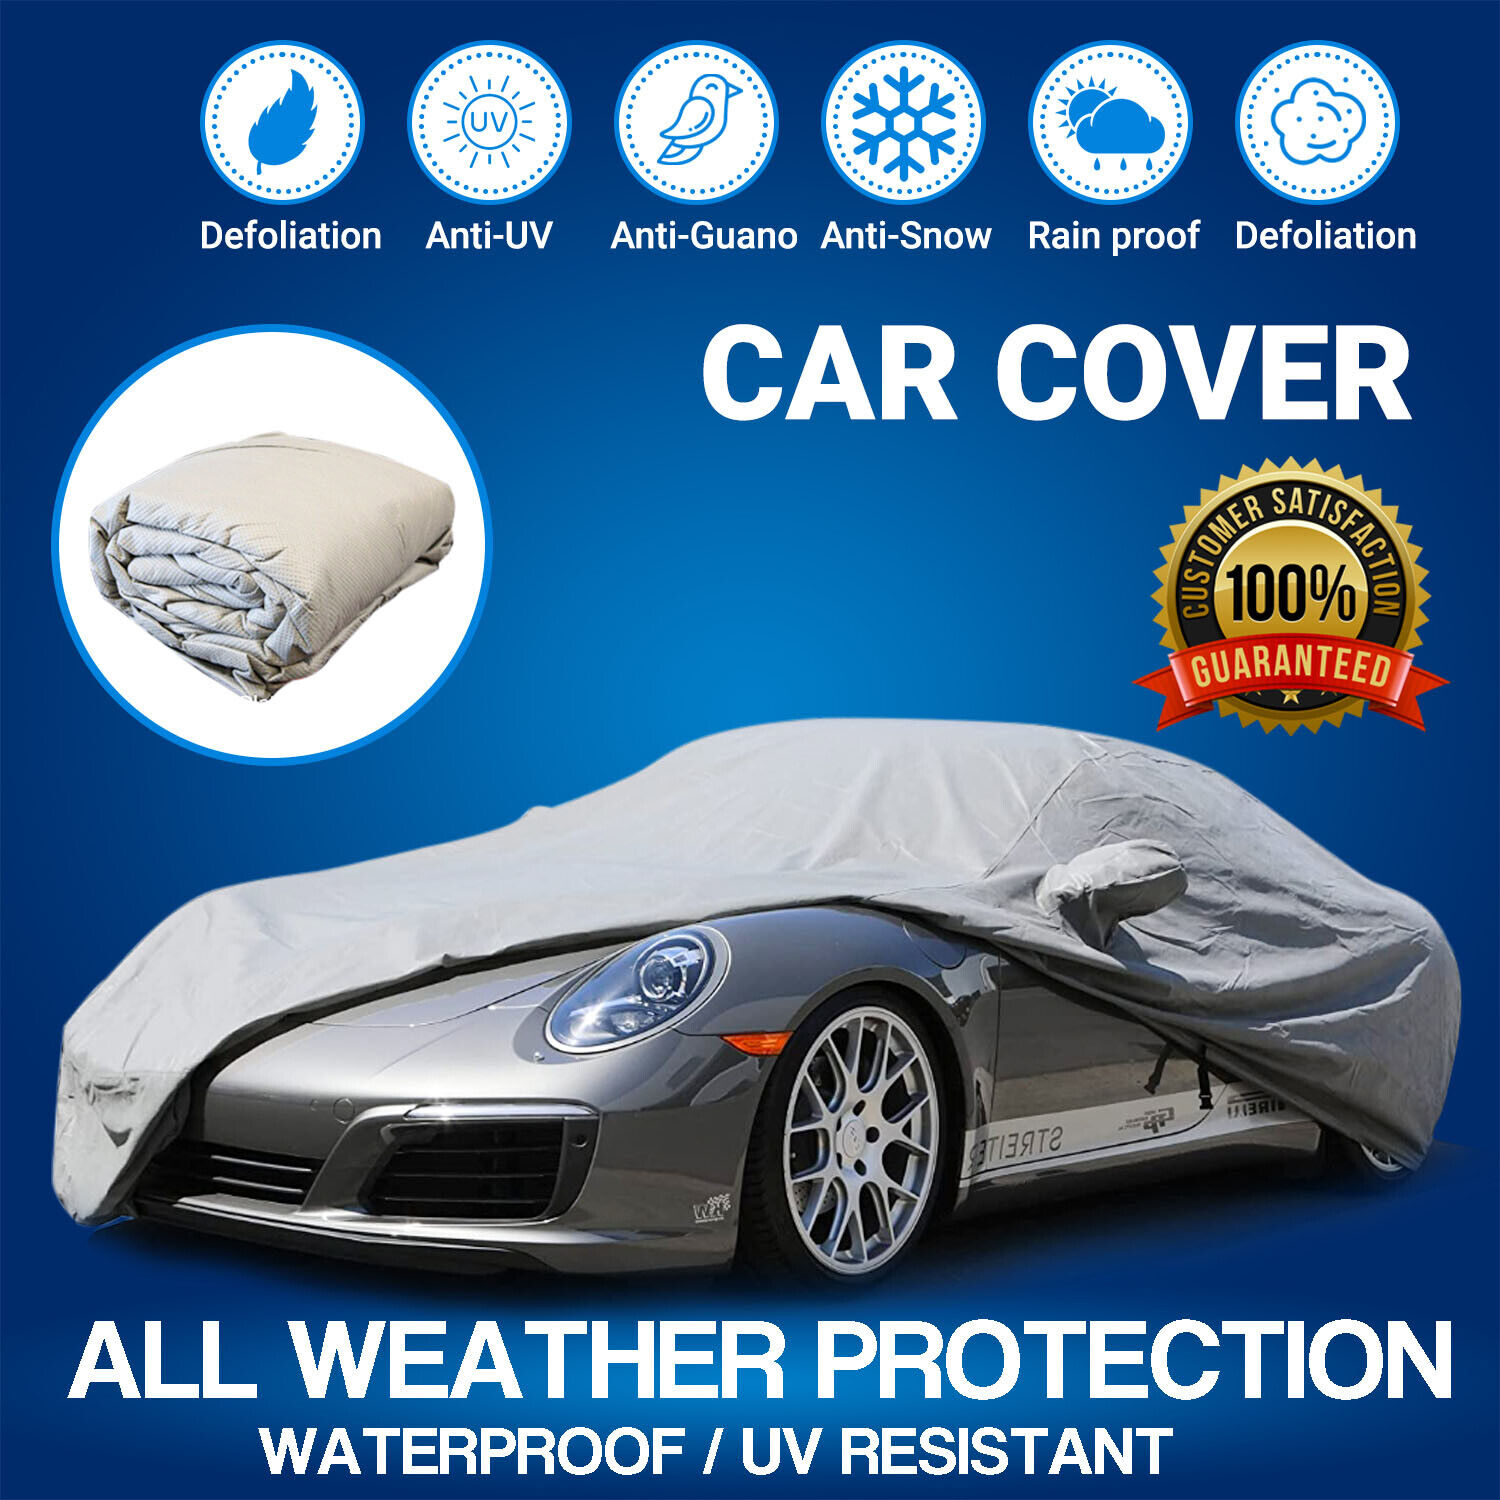 All Weathers Protection Waterproof UV Custom Car Cover For 1998-2002 BMW M COUPE